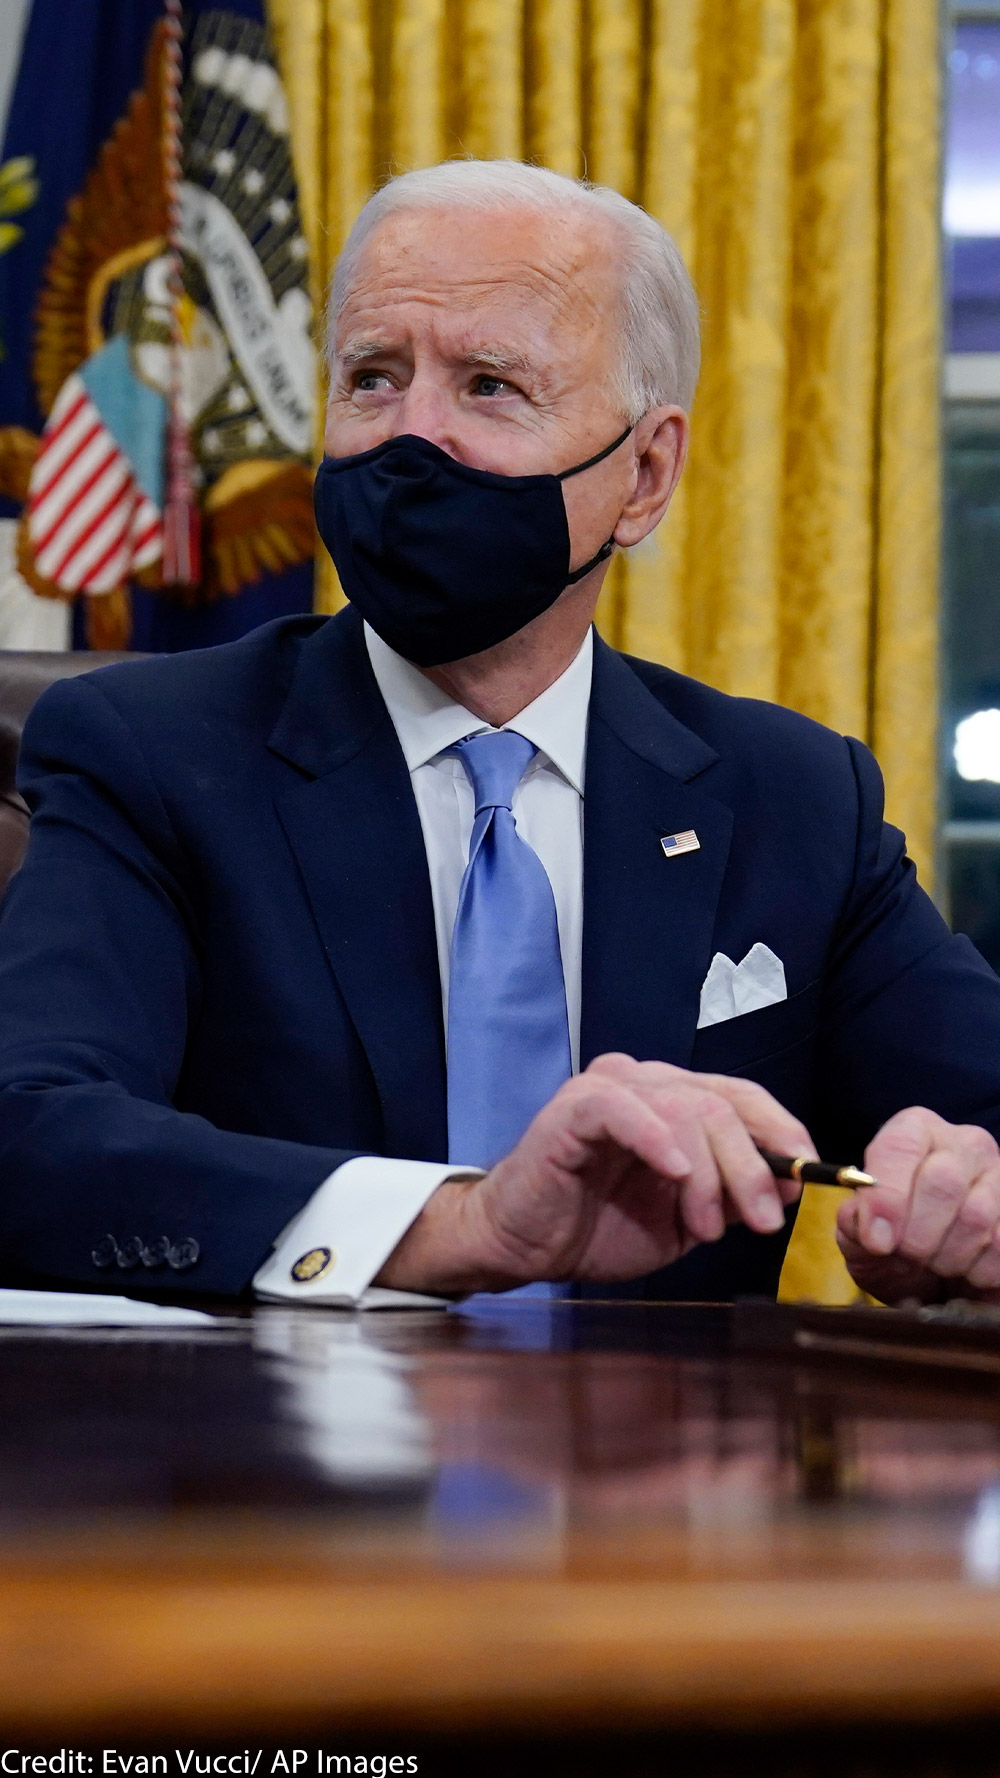 A photo of President Biden in the Oval Office wearing a mask.